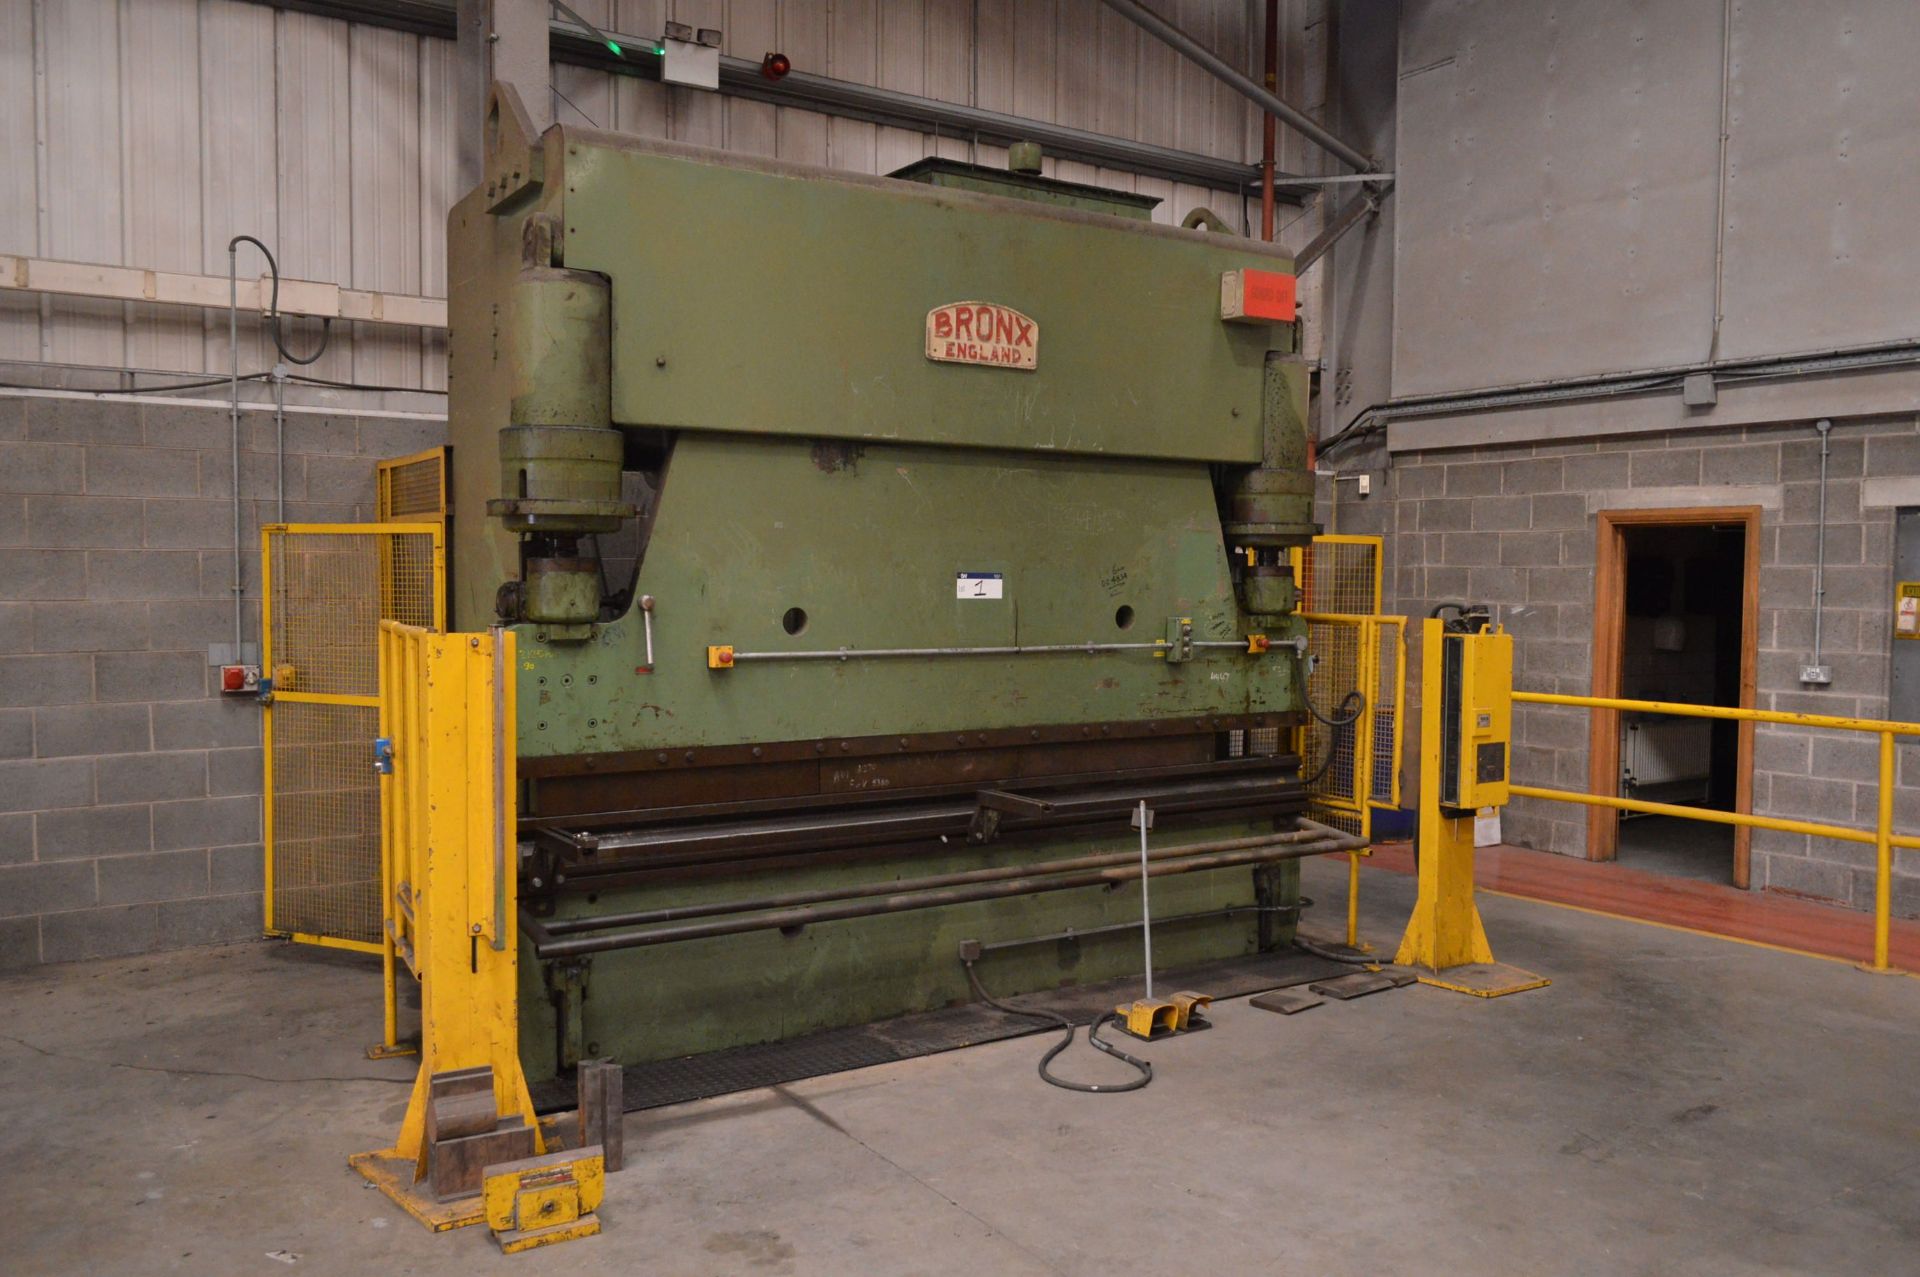 Bronx 200.220.10.H 160 tonne HYDRAULIC PRESS BRAKE, serial no. 30675, 12ft wide, with Sick infra-red